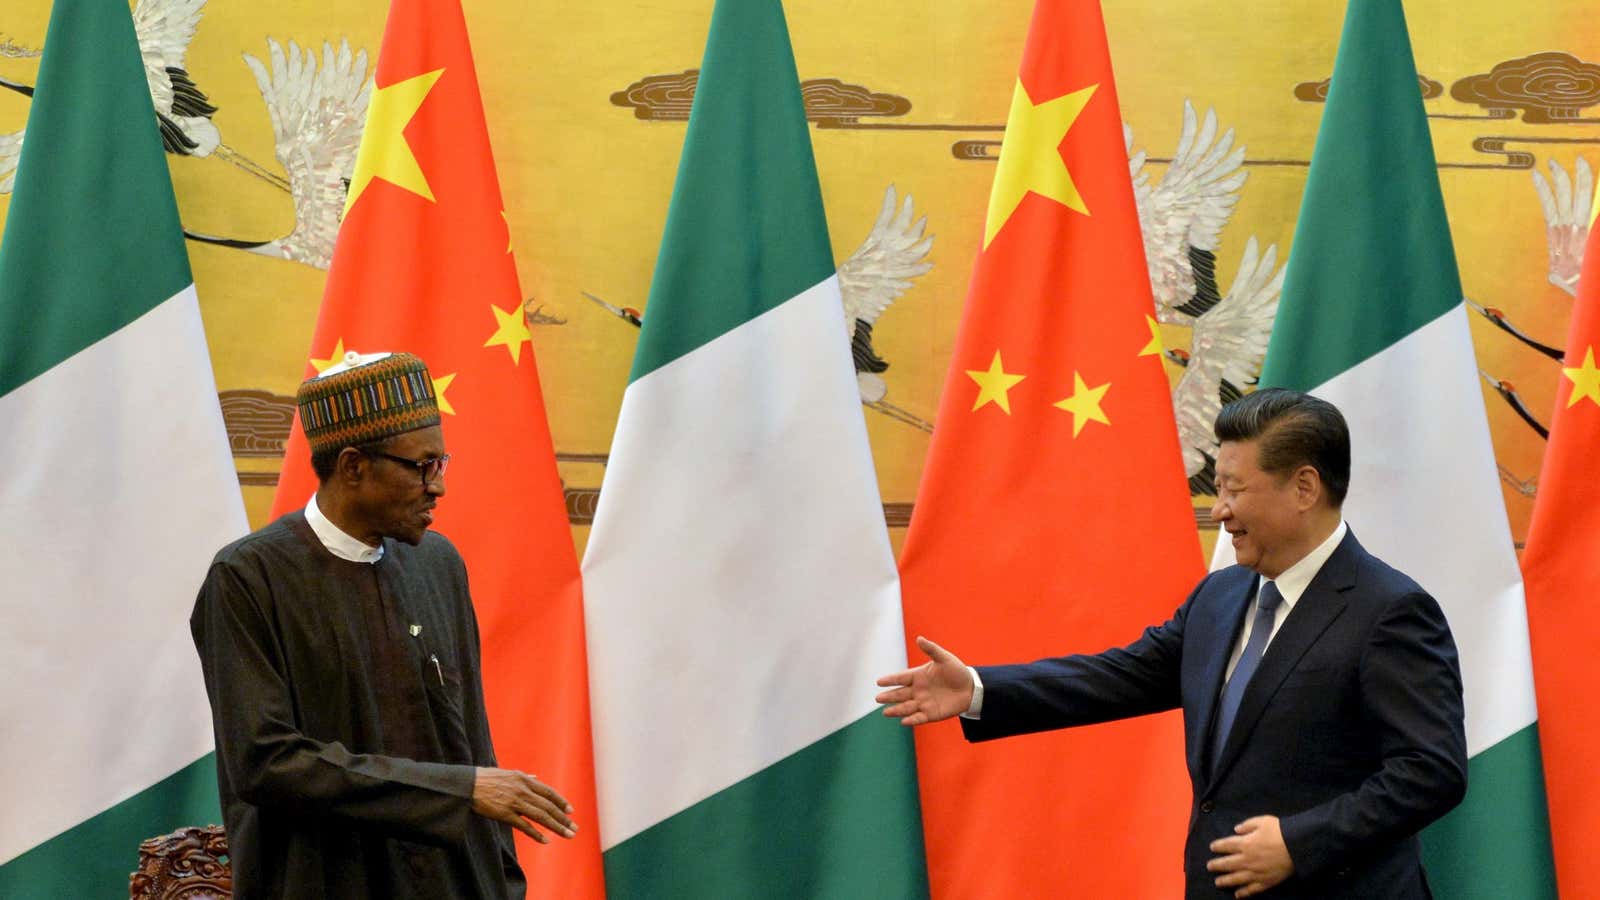 President of the Federal Republic of Nigeria, Muhammadu Buhari (L) and Chinese President, Xi Jinping shake hands during a signing ceremony at the Great Hall of the People in Beijing, April 12, 2016. REUTERS/Kenzaburo Fukuhara/Pool – GF10000379897